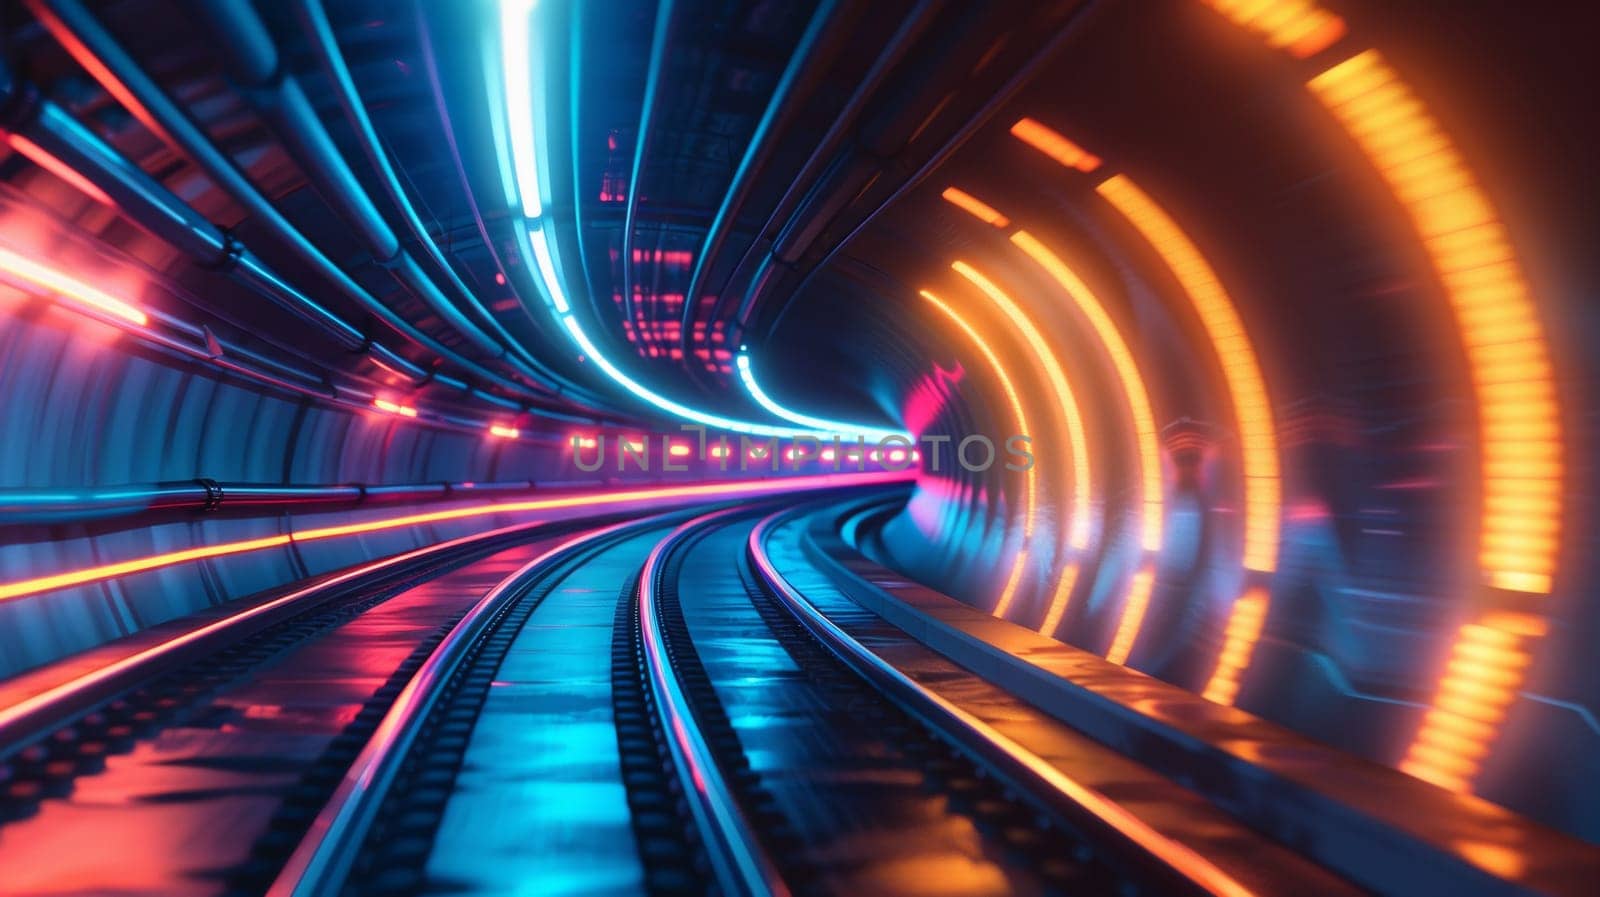 A train is traveling through a tunnel with bright lights